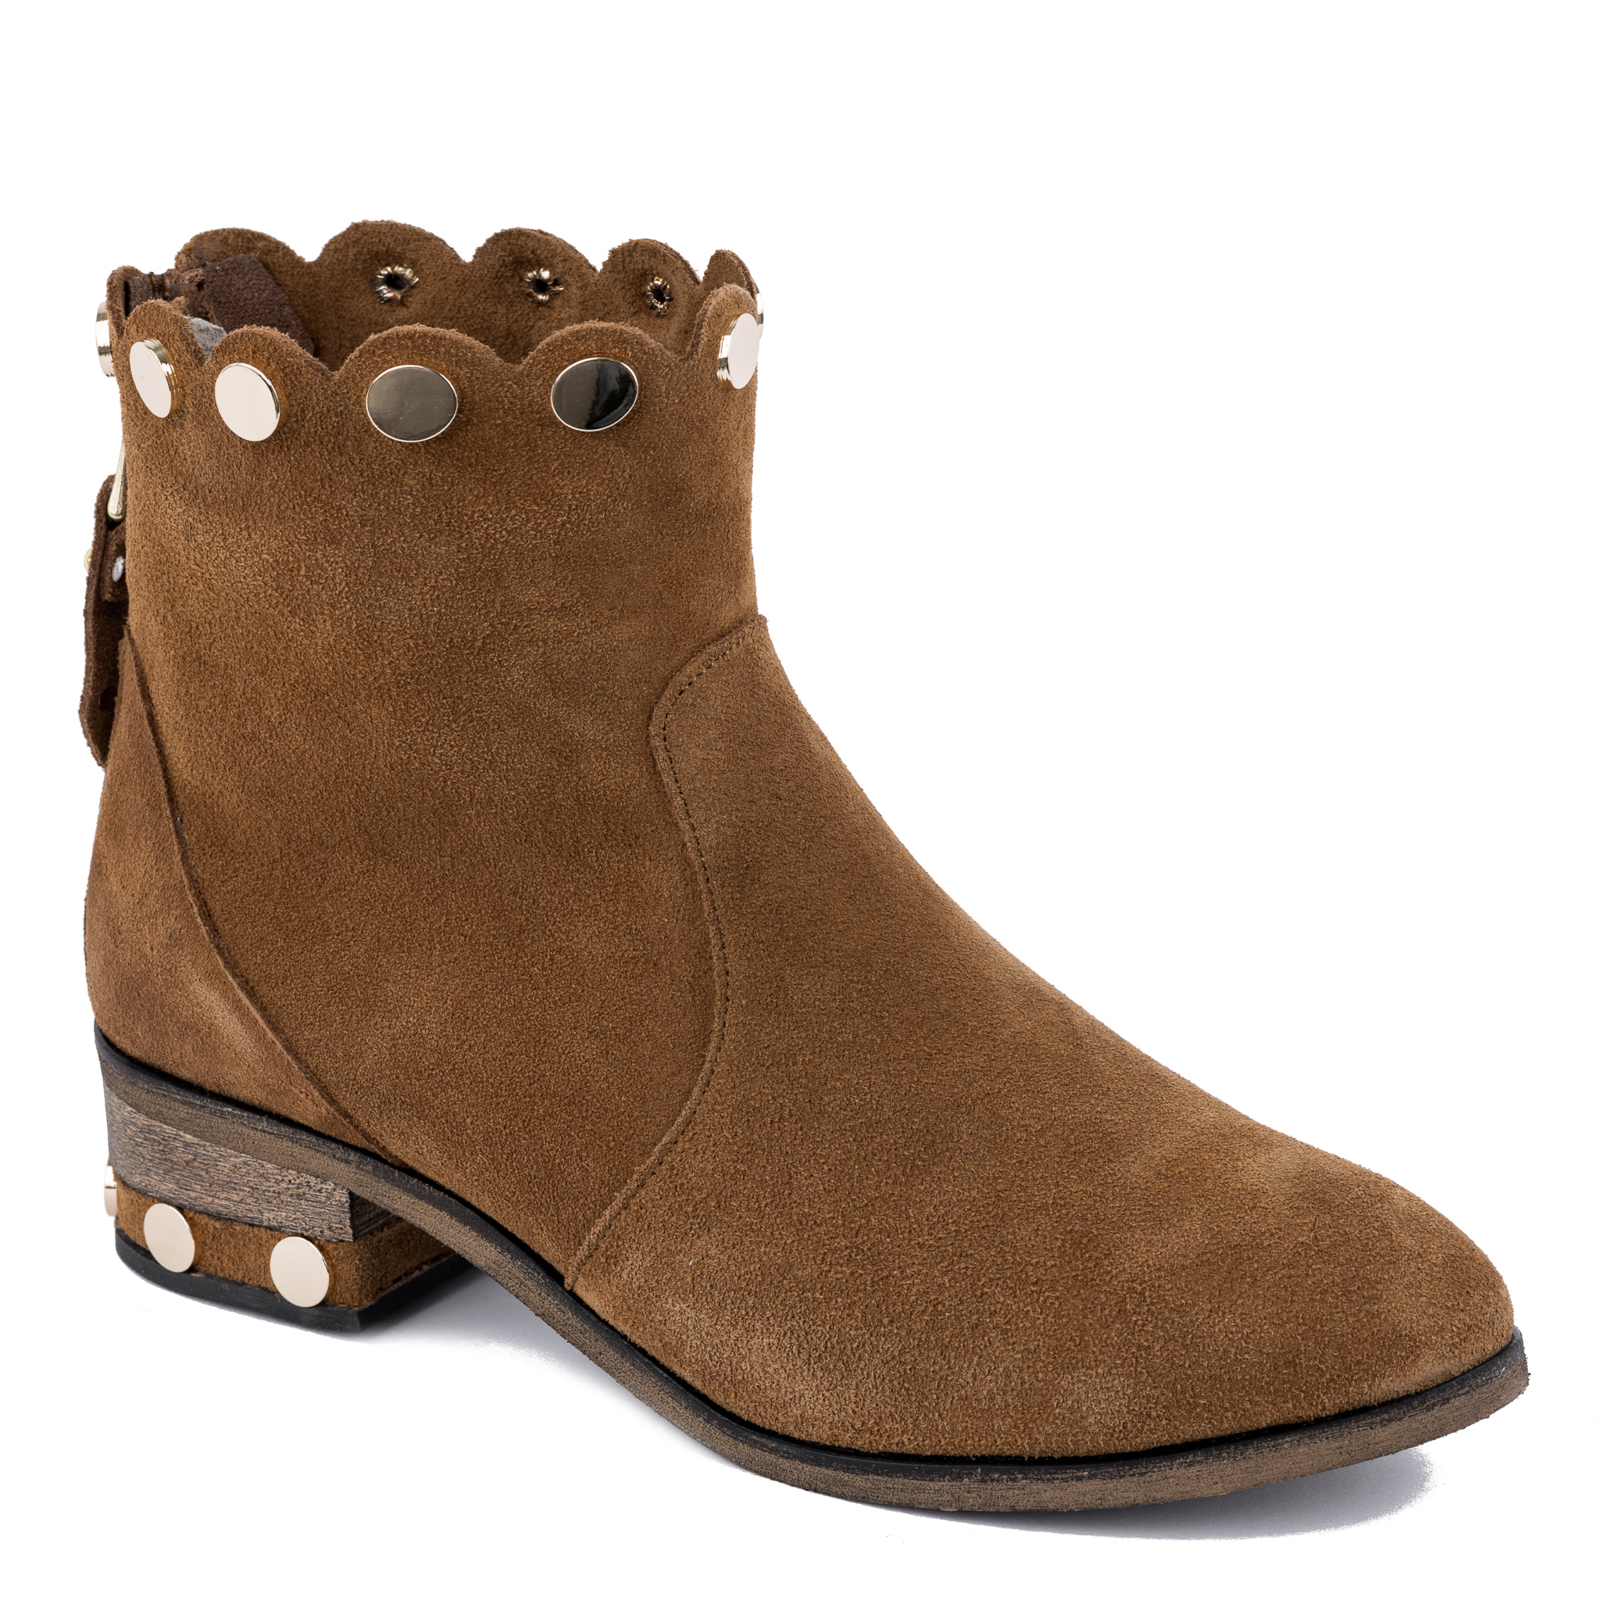 LEATHER ANKLE BOOTS WITH RIVETS - CAMEL